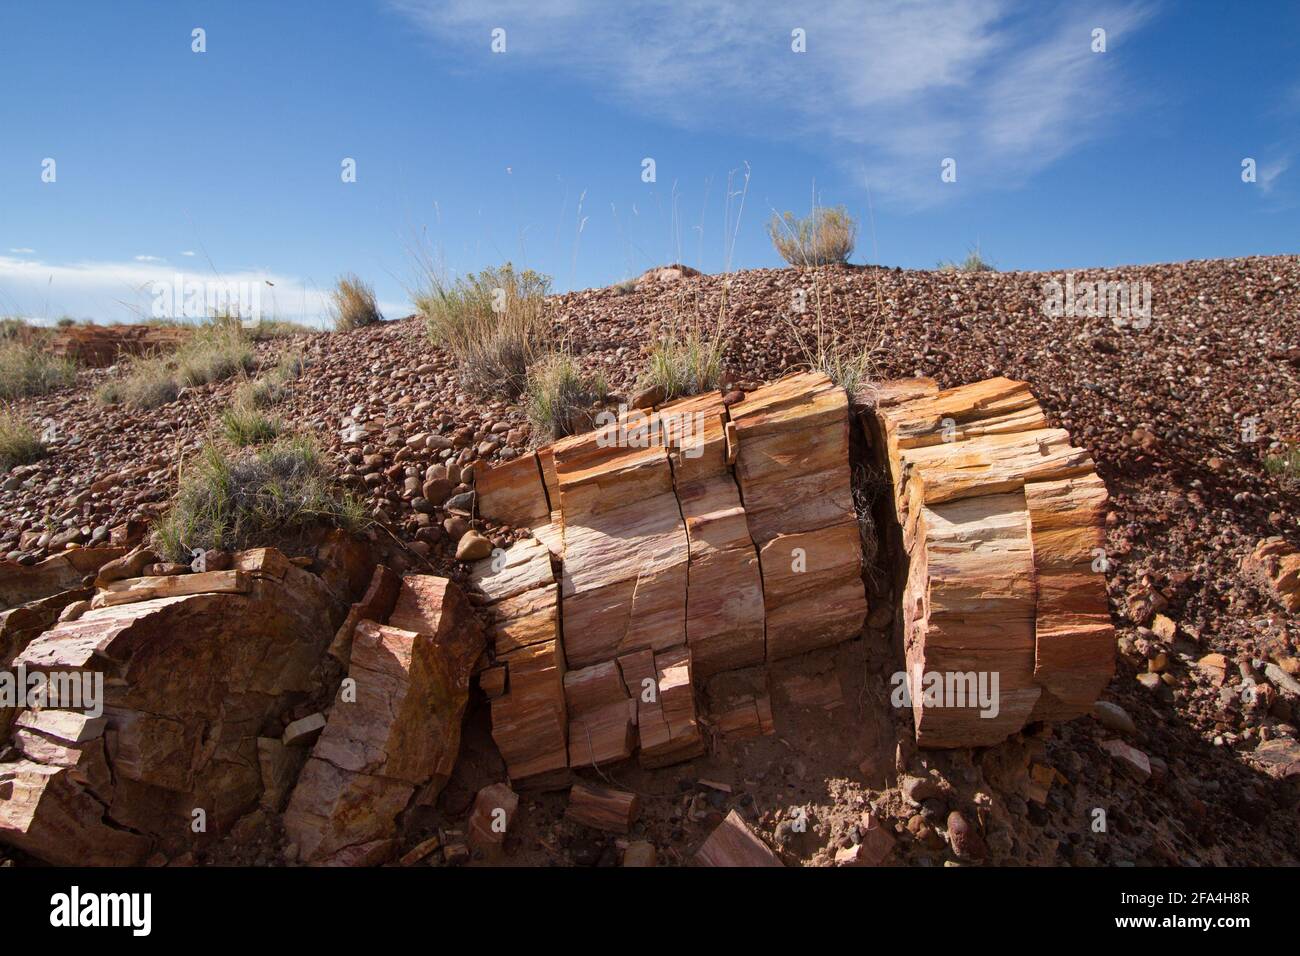 The Arizona Petrified Forest National Park is located in the northeastern part of Arizona, about 25 miles east of Holbrook. The Petrified Forest is ho Stock Photo